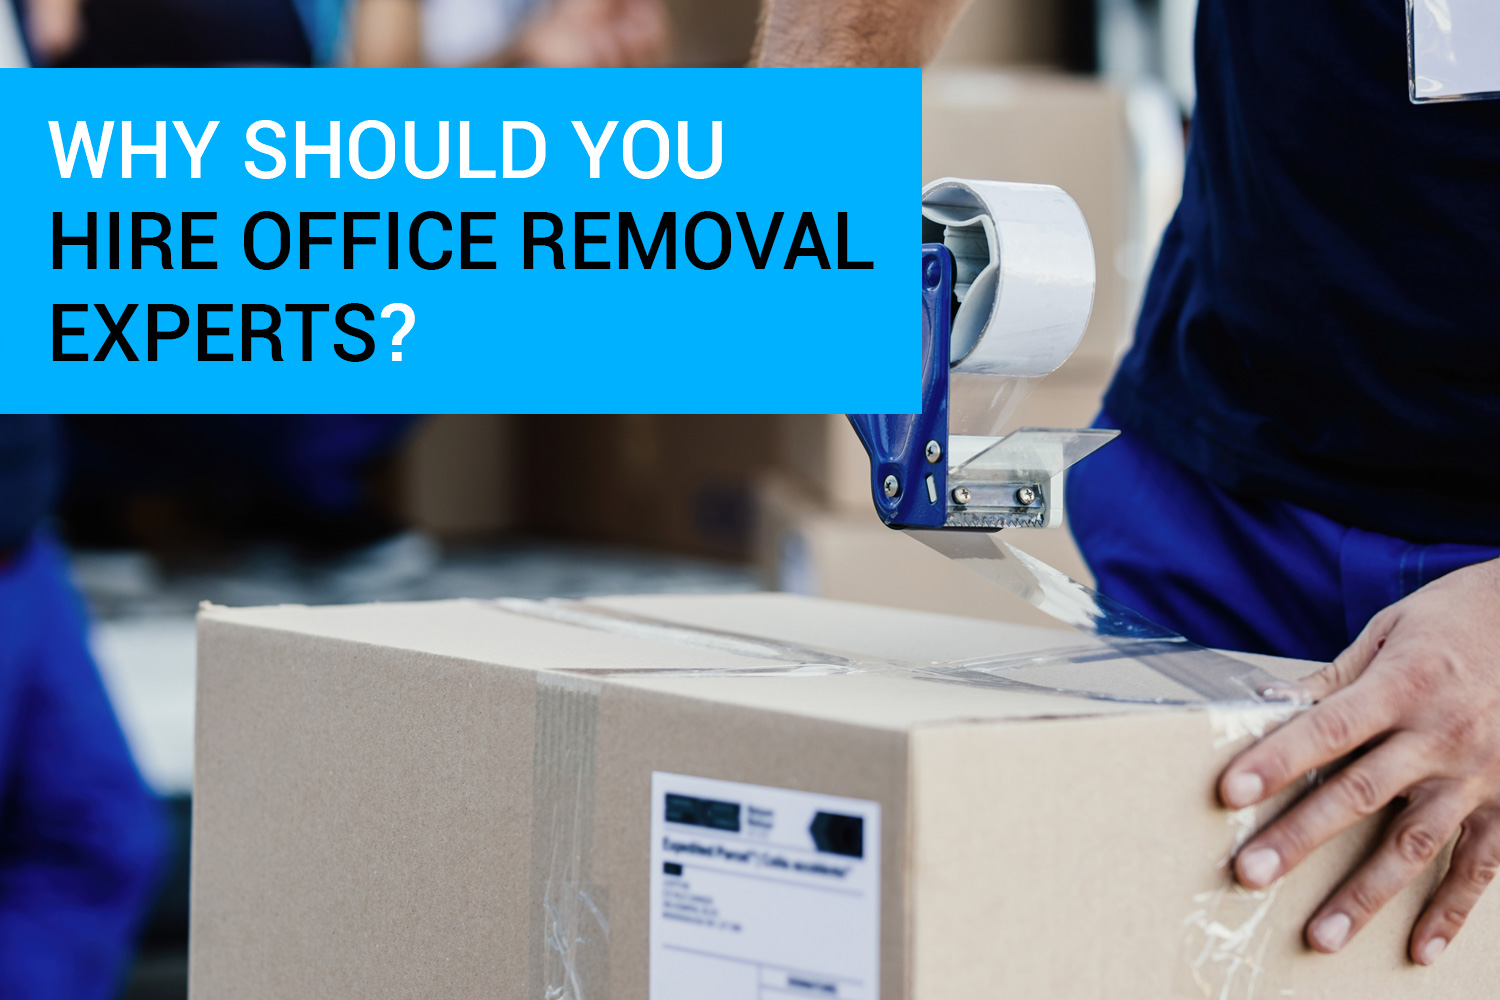 Why Should You Hire Office Removal Experts?